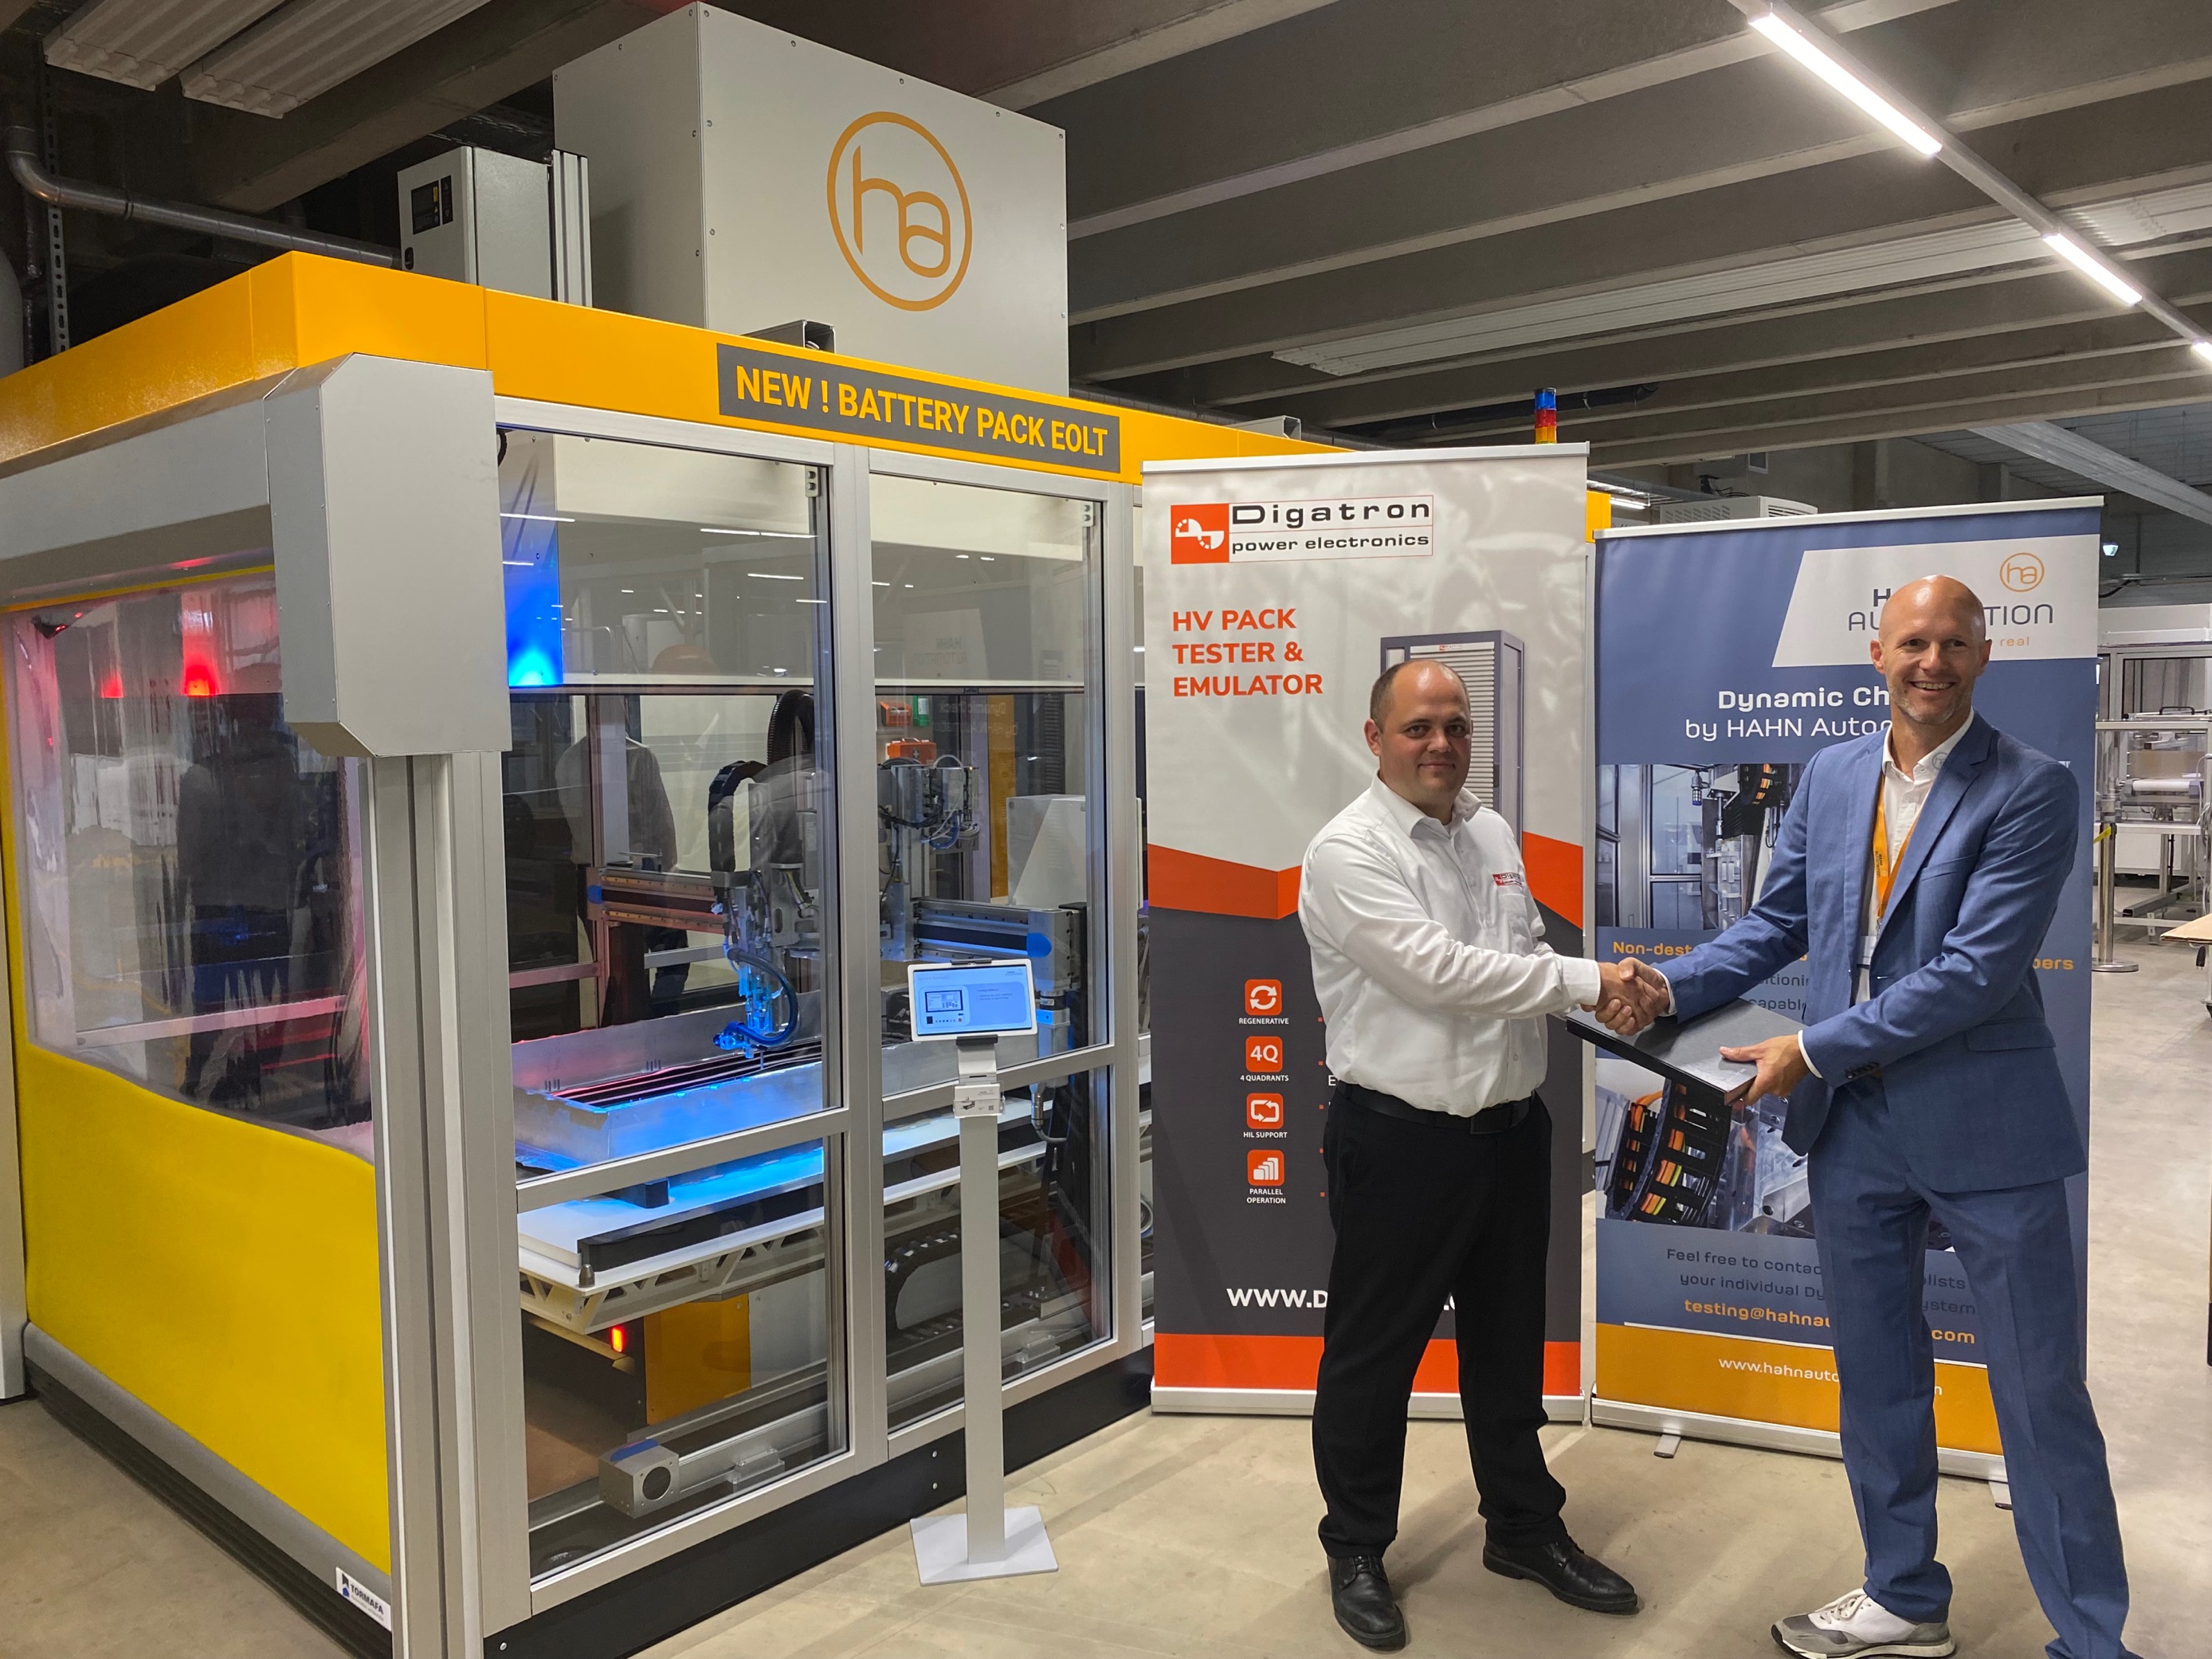 Digatron & Hahn Automation together in the picture (from left to right): Sebastian Wetzeler (Head of R&D - Digatron Power Electronics), Christian Bubat (Global Business Development Manager - Hahn Automation)